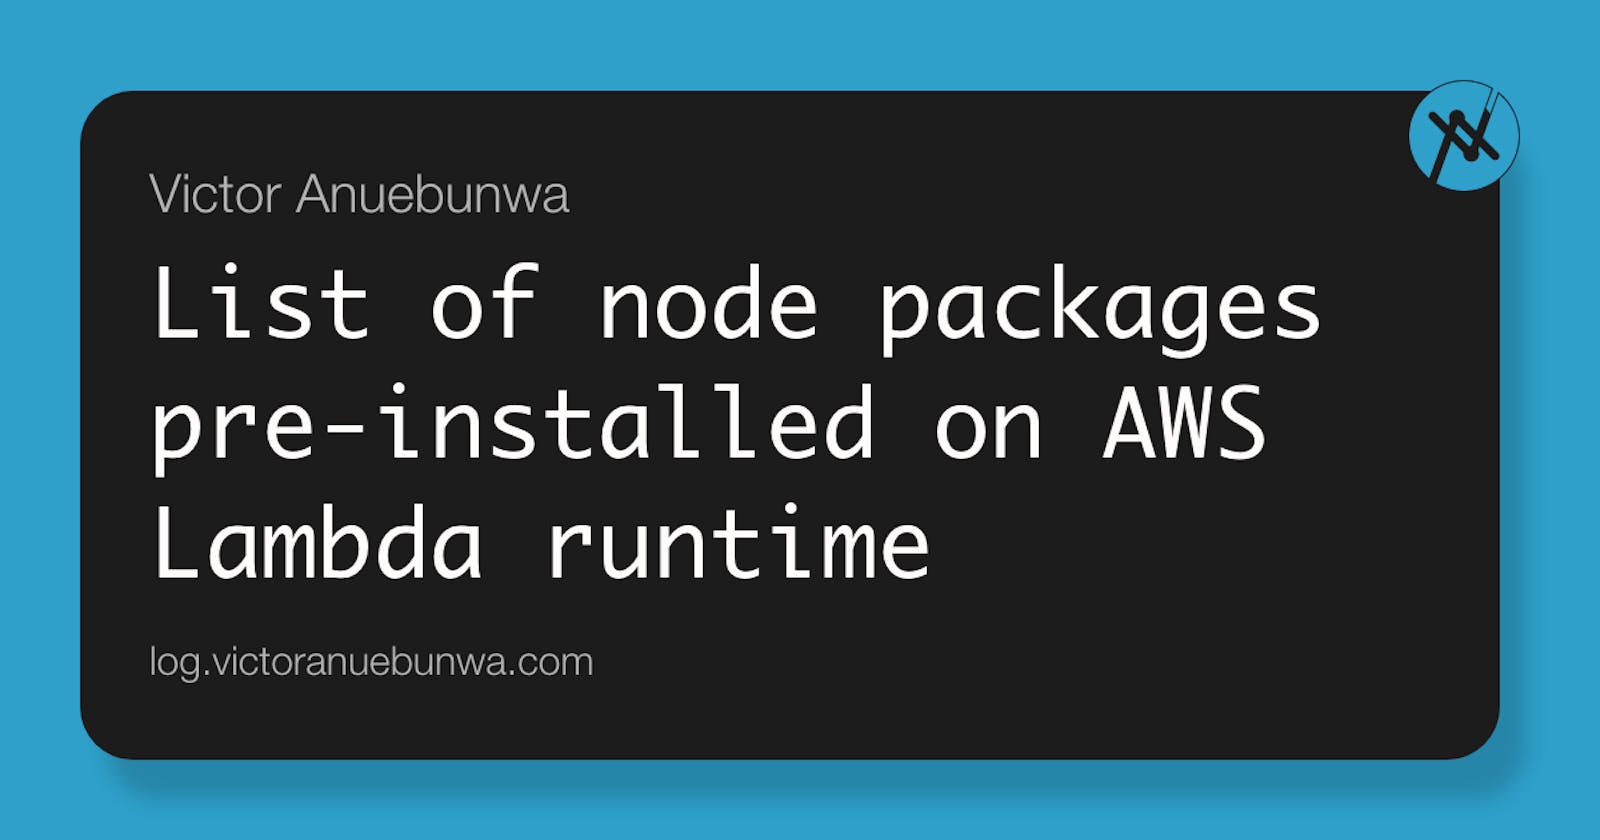 List of node packages pre-installed on AWS Lambda runtime